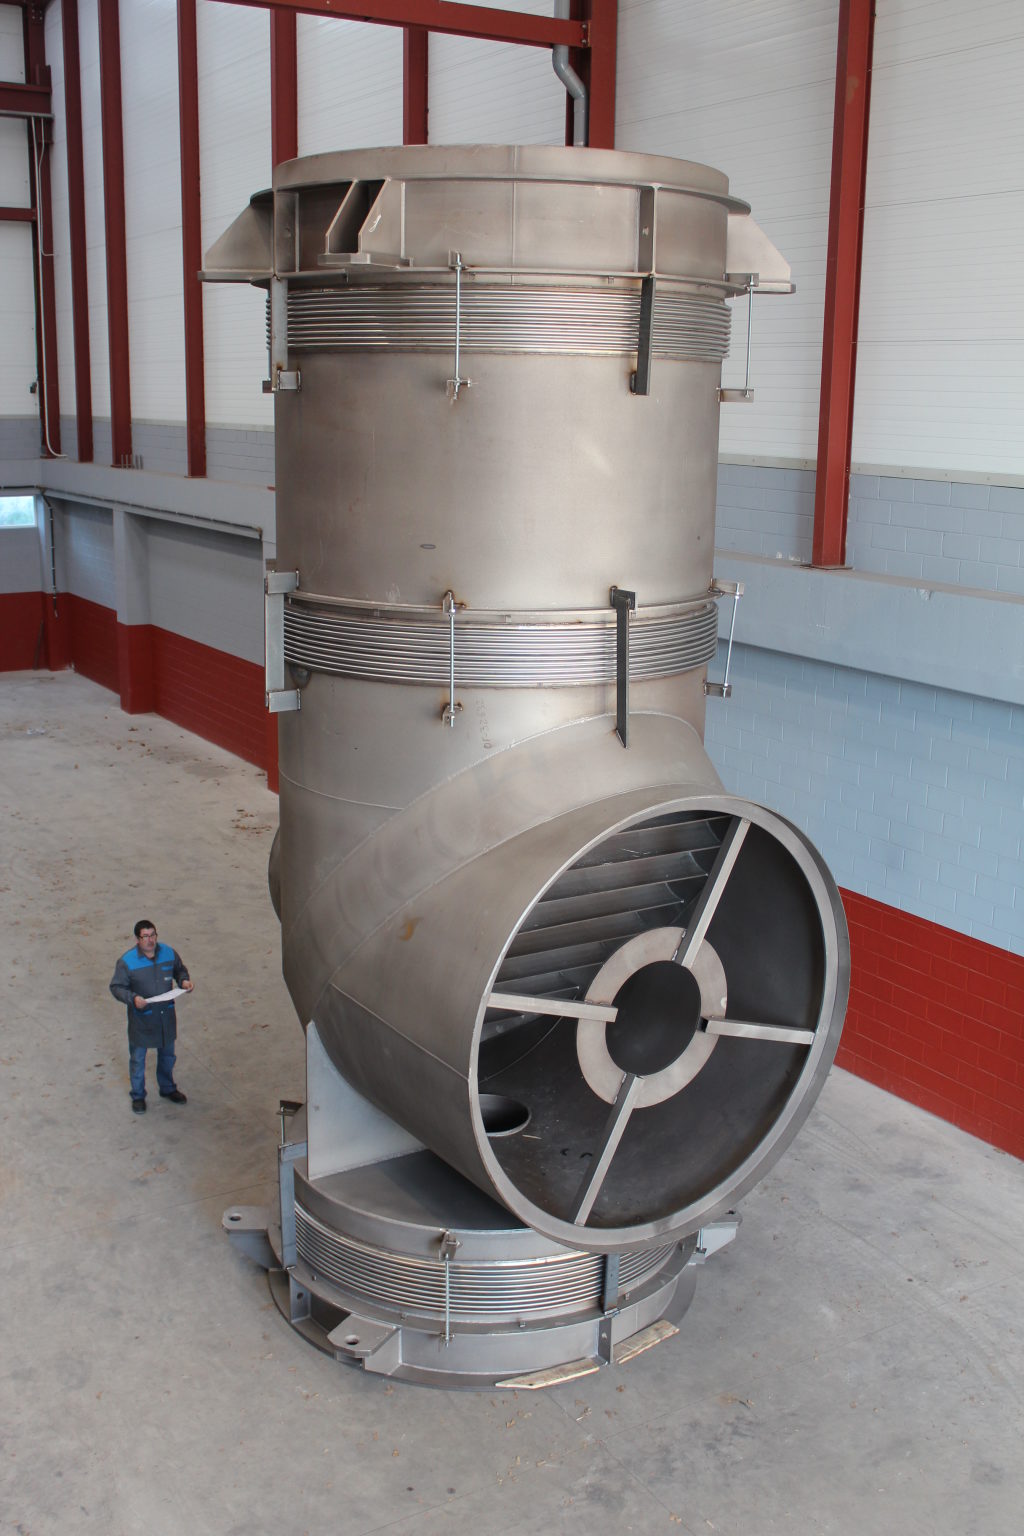 Large Pressure Balanced Expansion Joint delivered to a Wate to Energy facility in the UK